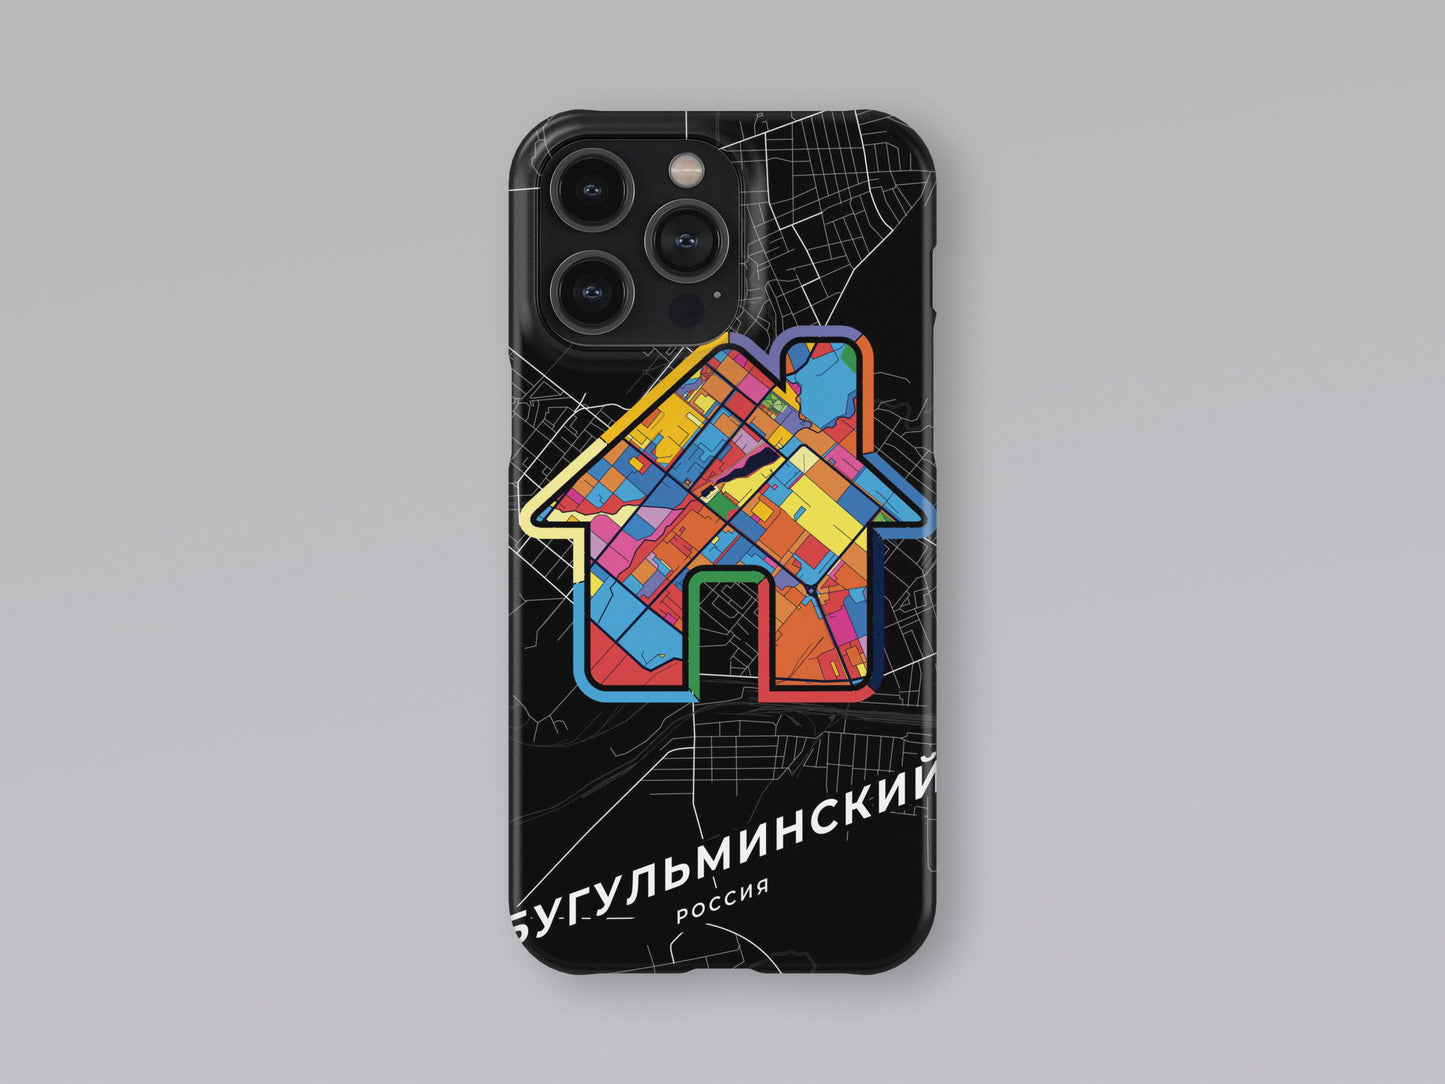 Bugulma Russia slim phone case with colorful icon. Birthday, wedding or housewarming gift. Couple match cases. 3